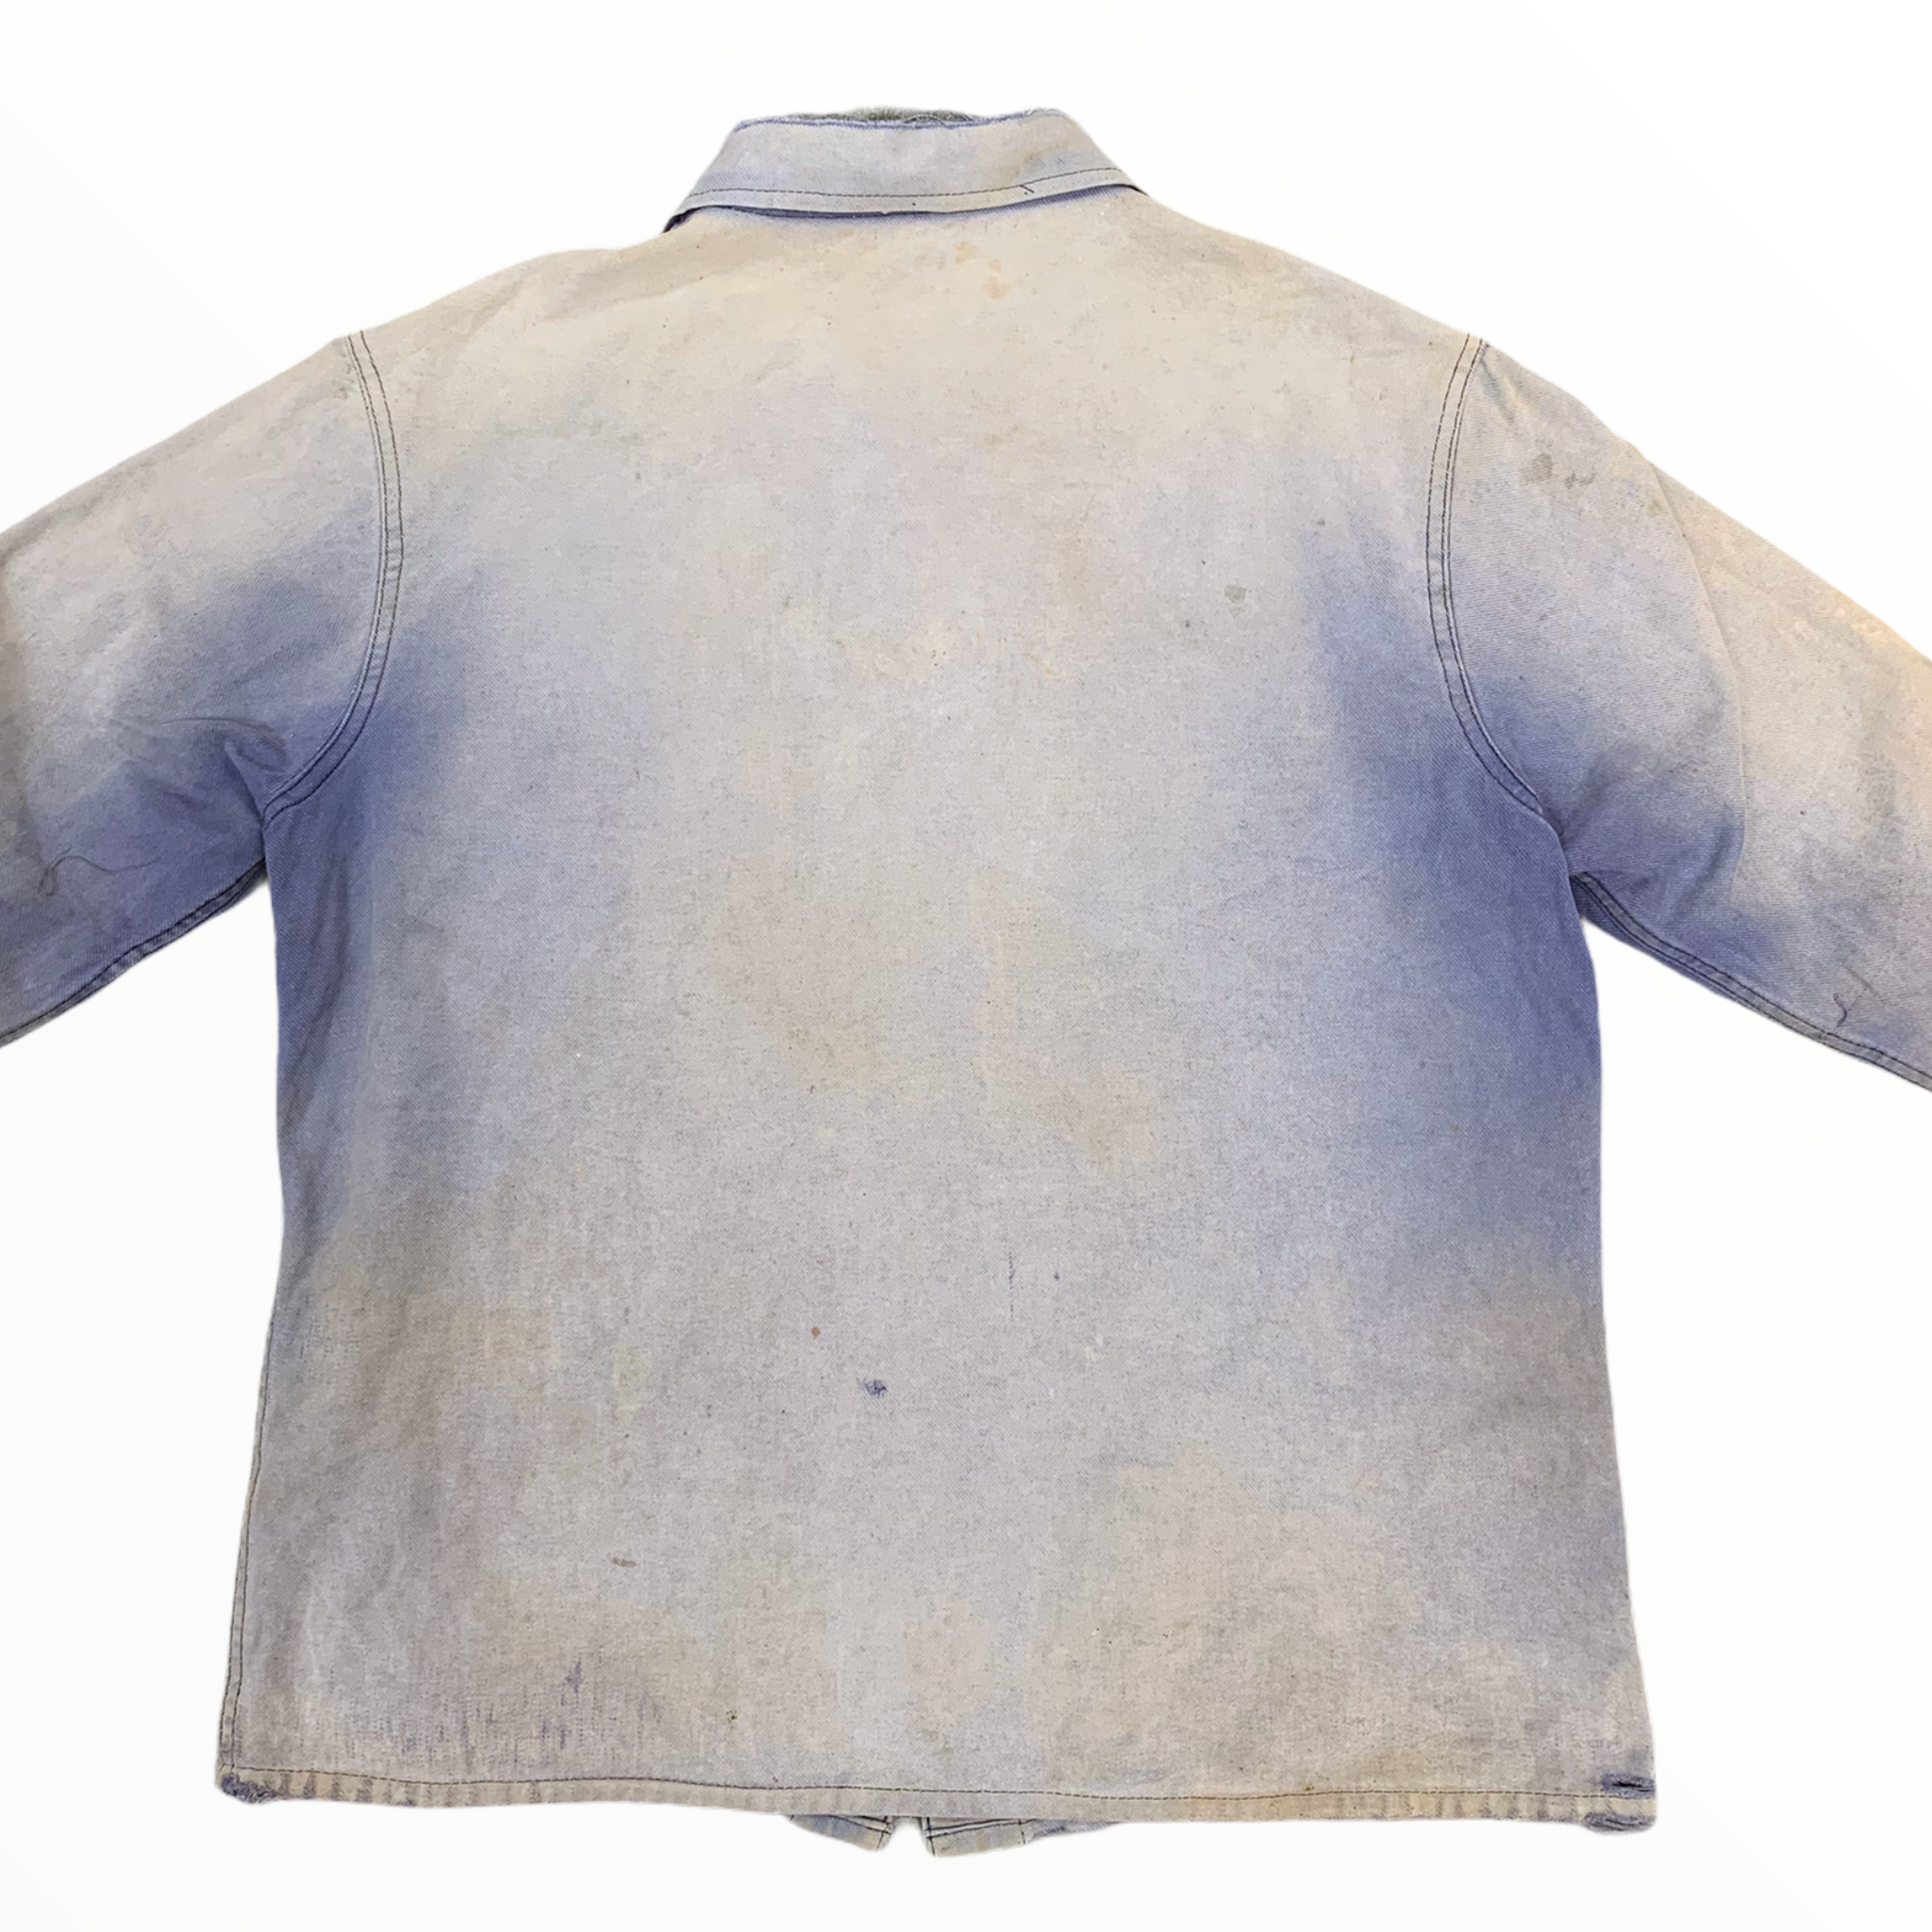 Sun Bleached French Moleskin Work Jacket with Mismatched Buttons - Dirty Wash Blue - S/M